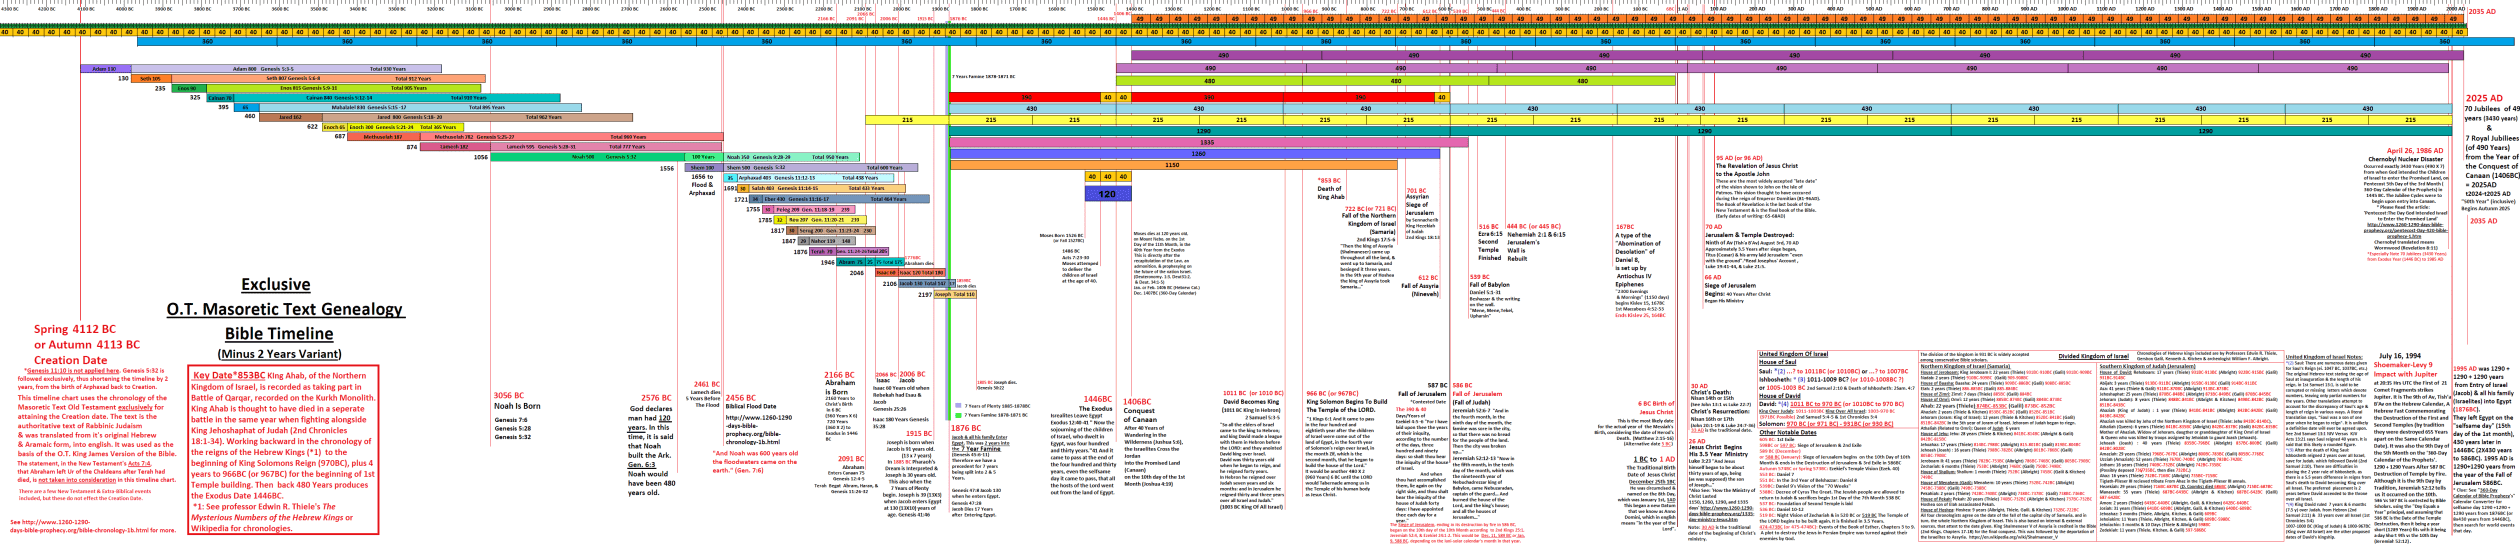 Timeline of Creation from 4112 BC to 2035 AD - 1260d.com